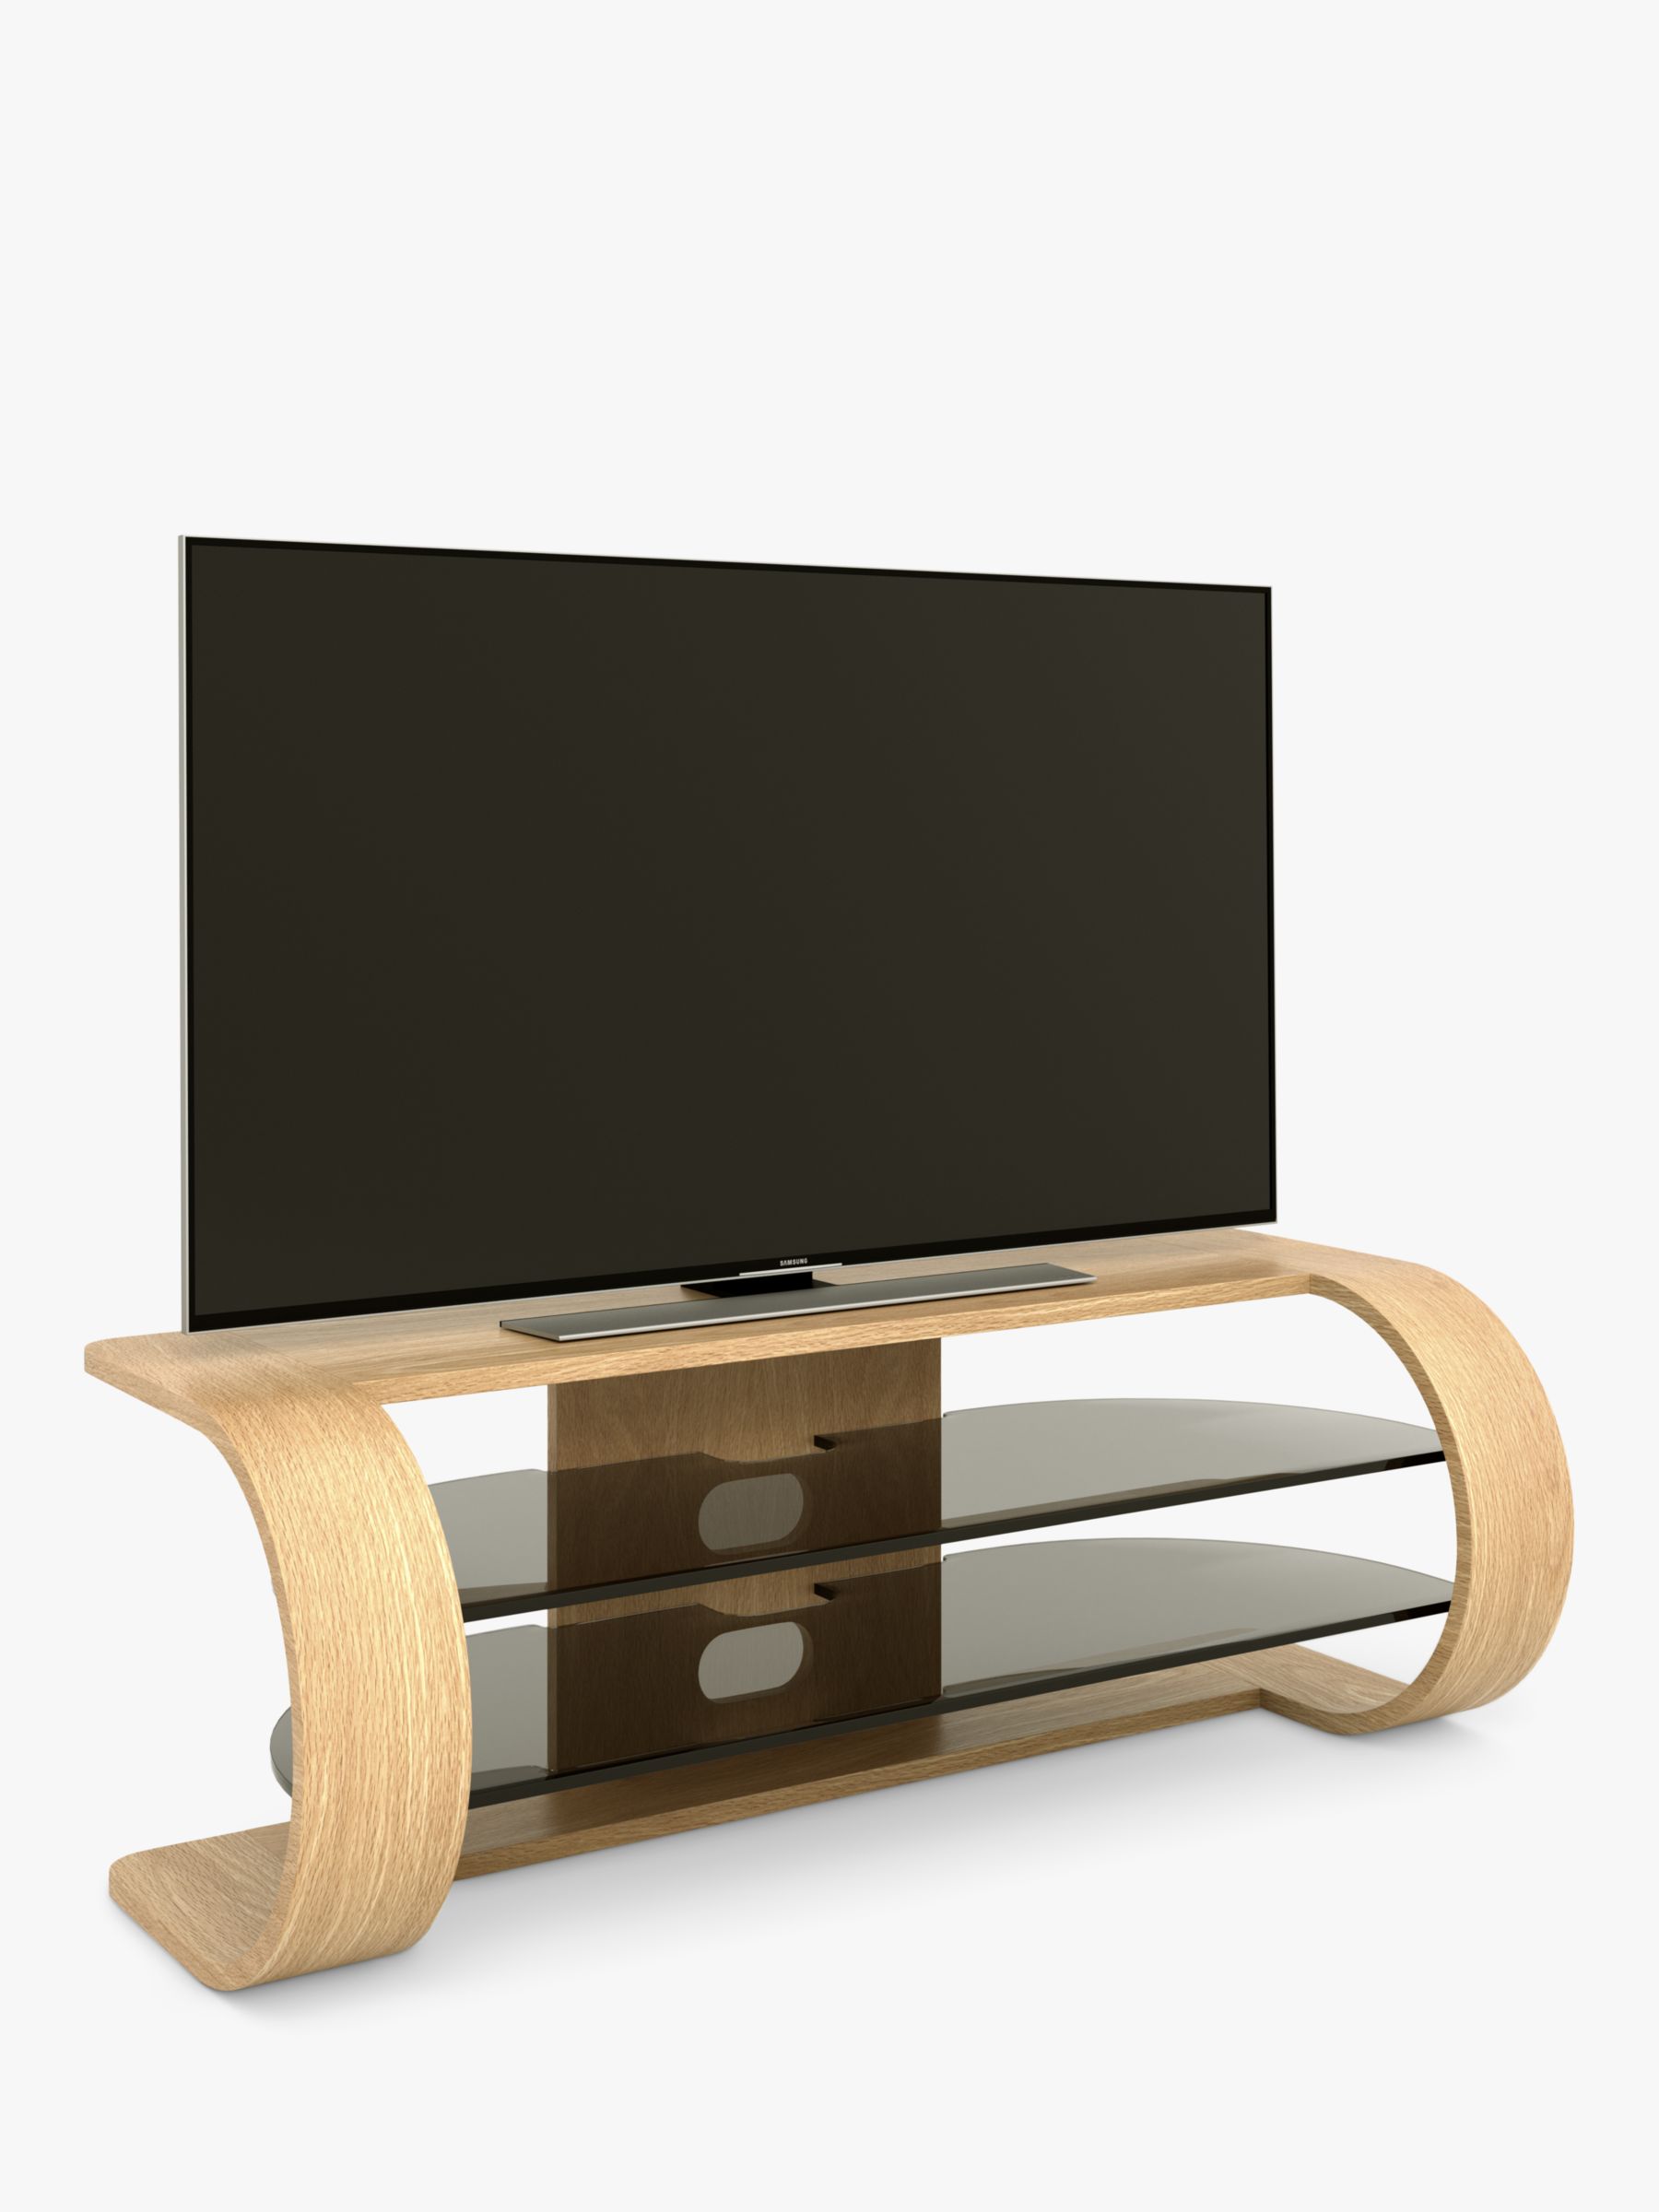 Tom Schneider Bow 120 TV Stand for TVs up to 50", Oak